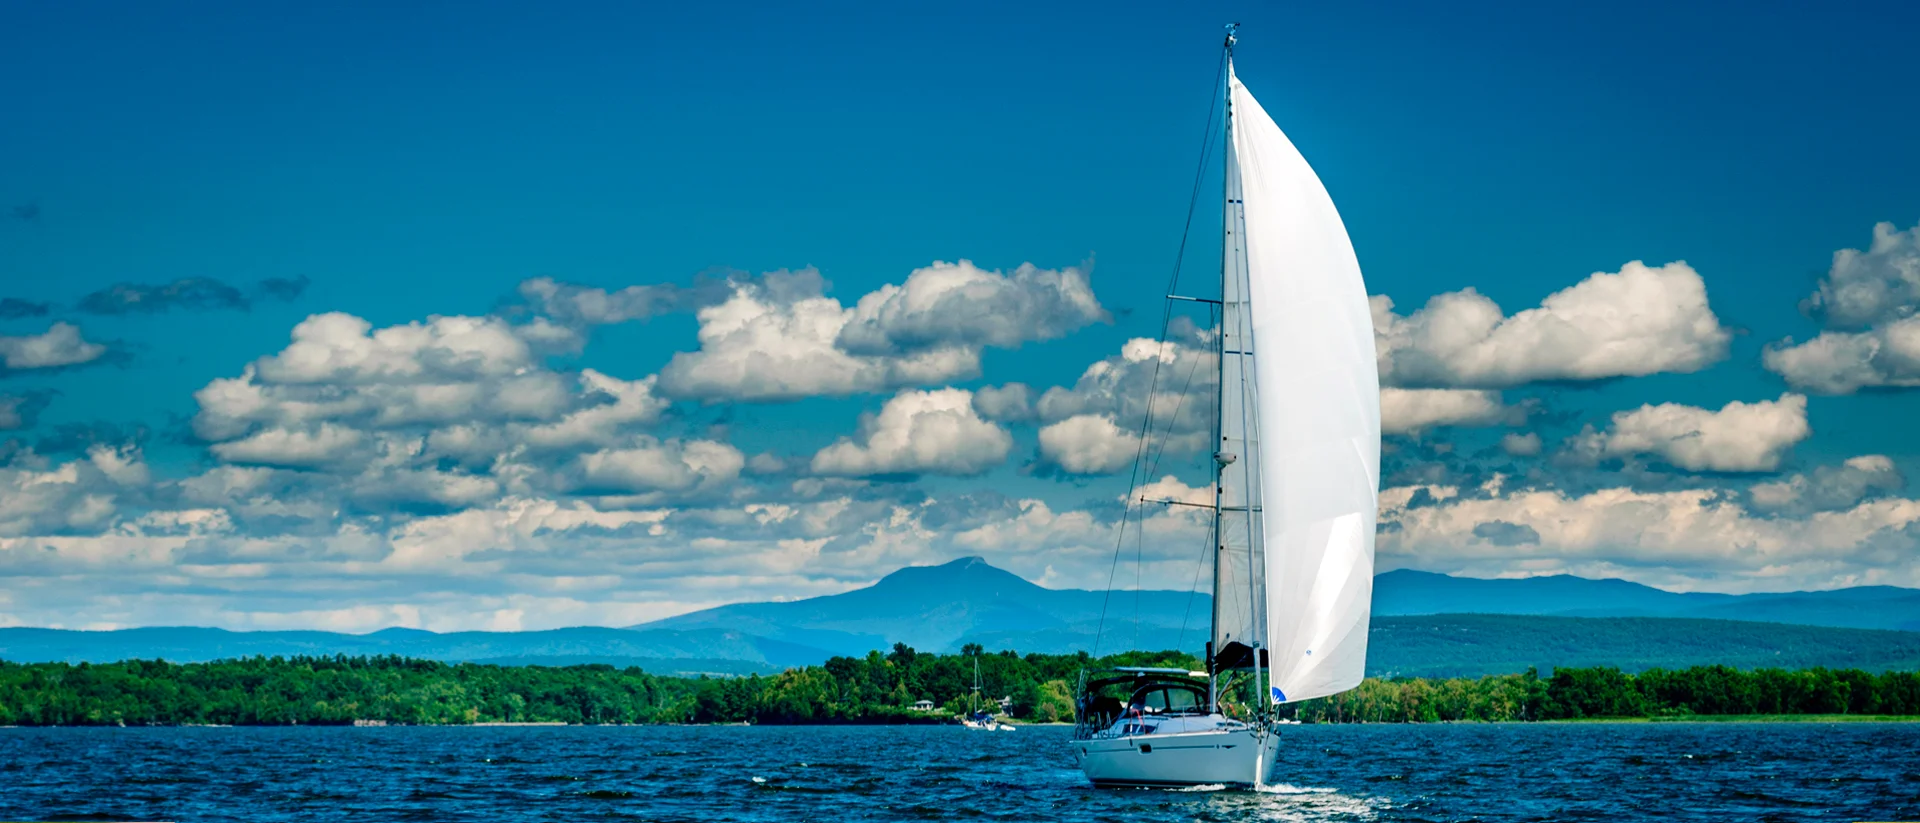 Yacht charter sailing in a beautiful landscape